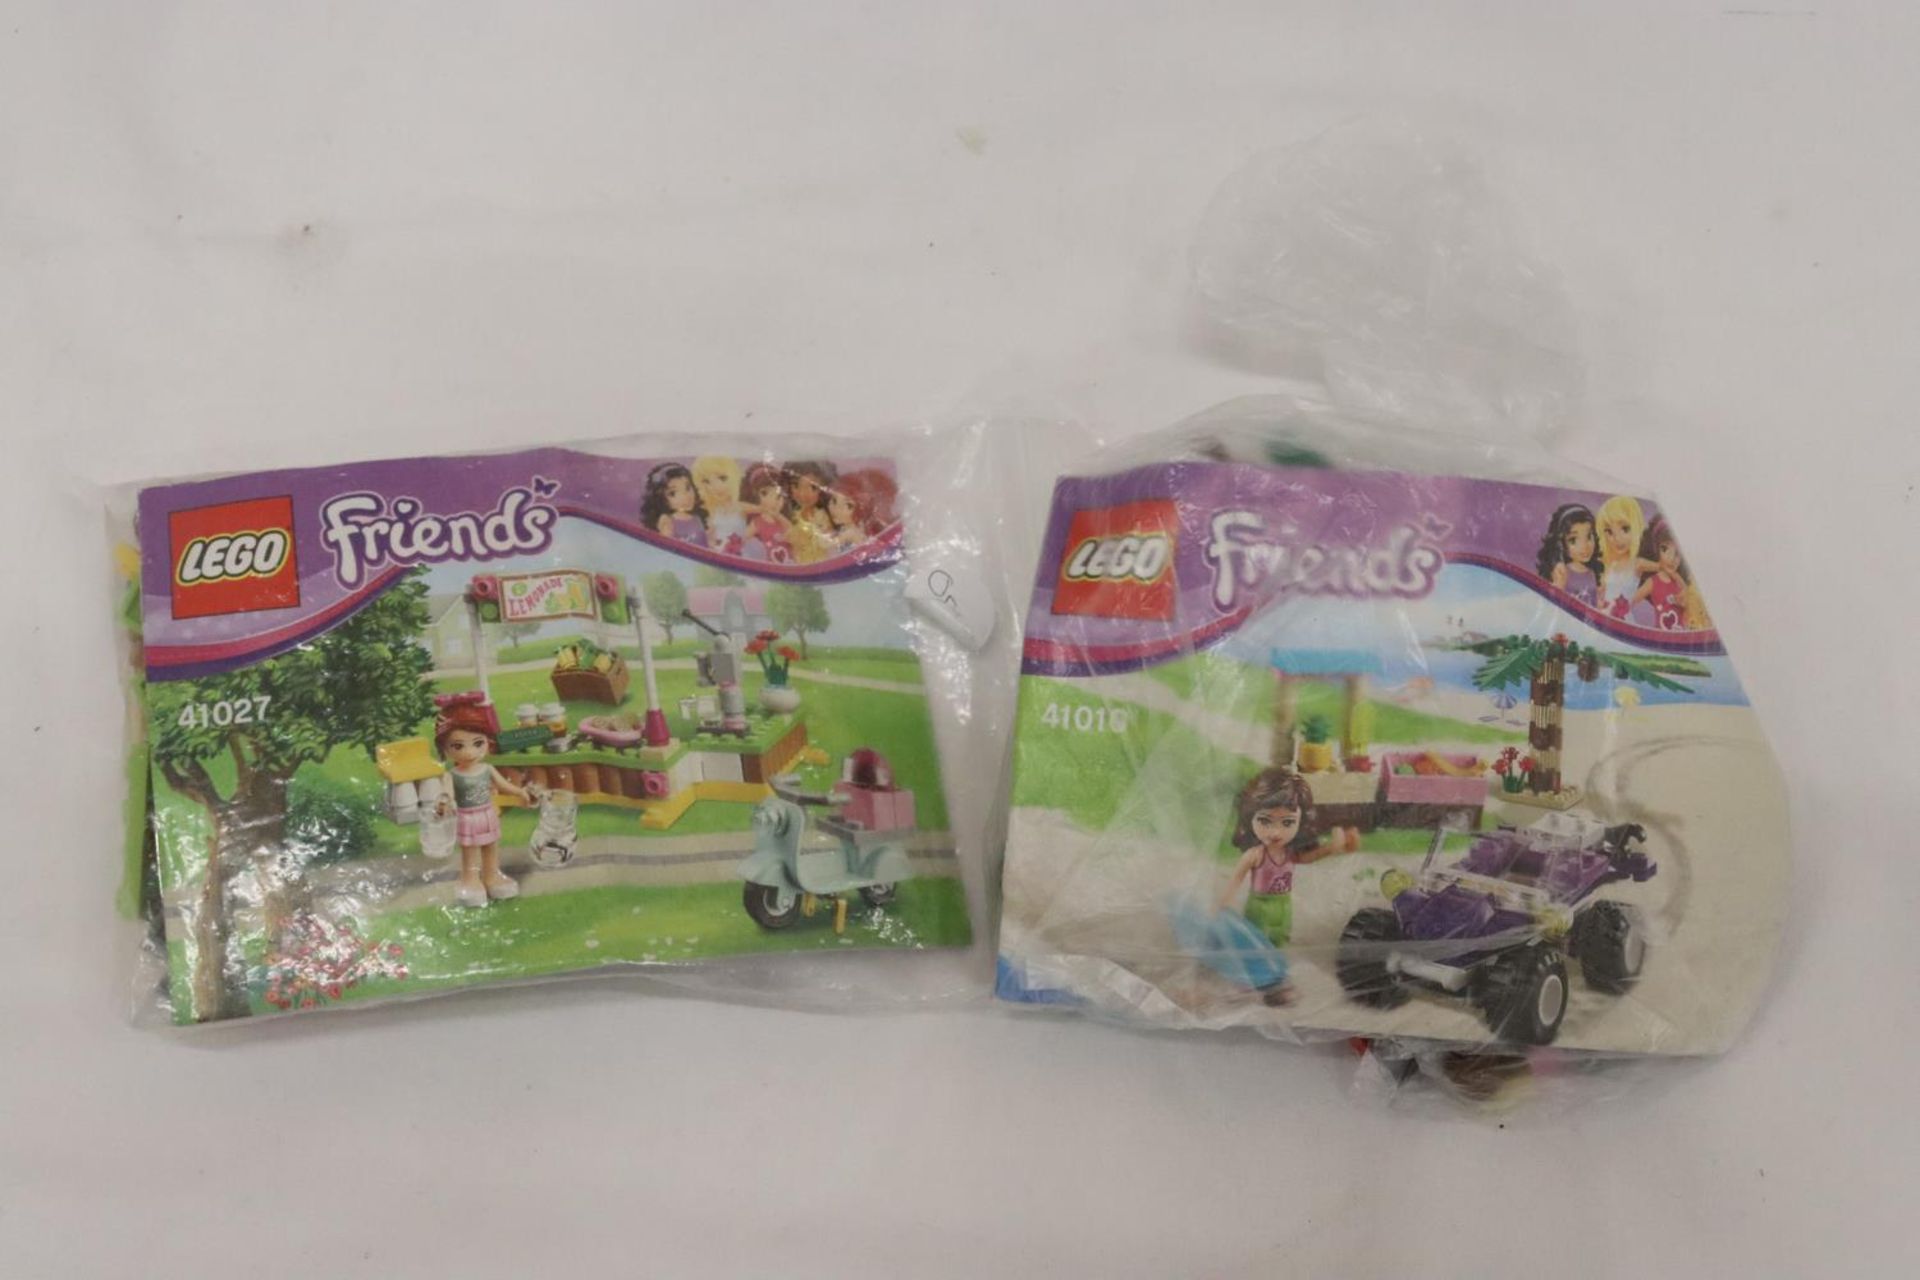 TWO LEGO 'FRIENDS' SETS, 41010 AND 41027, WITH INSTRUCTIONS